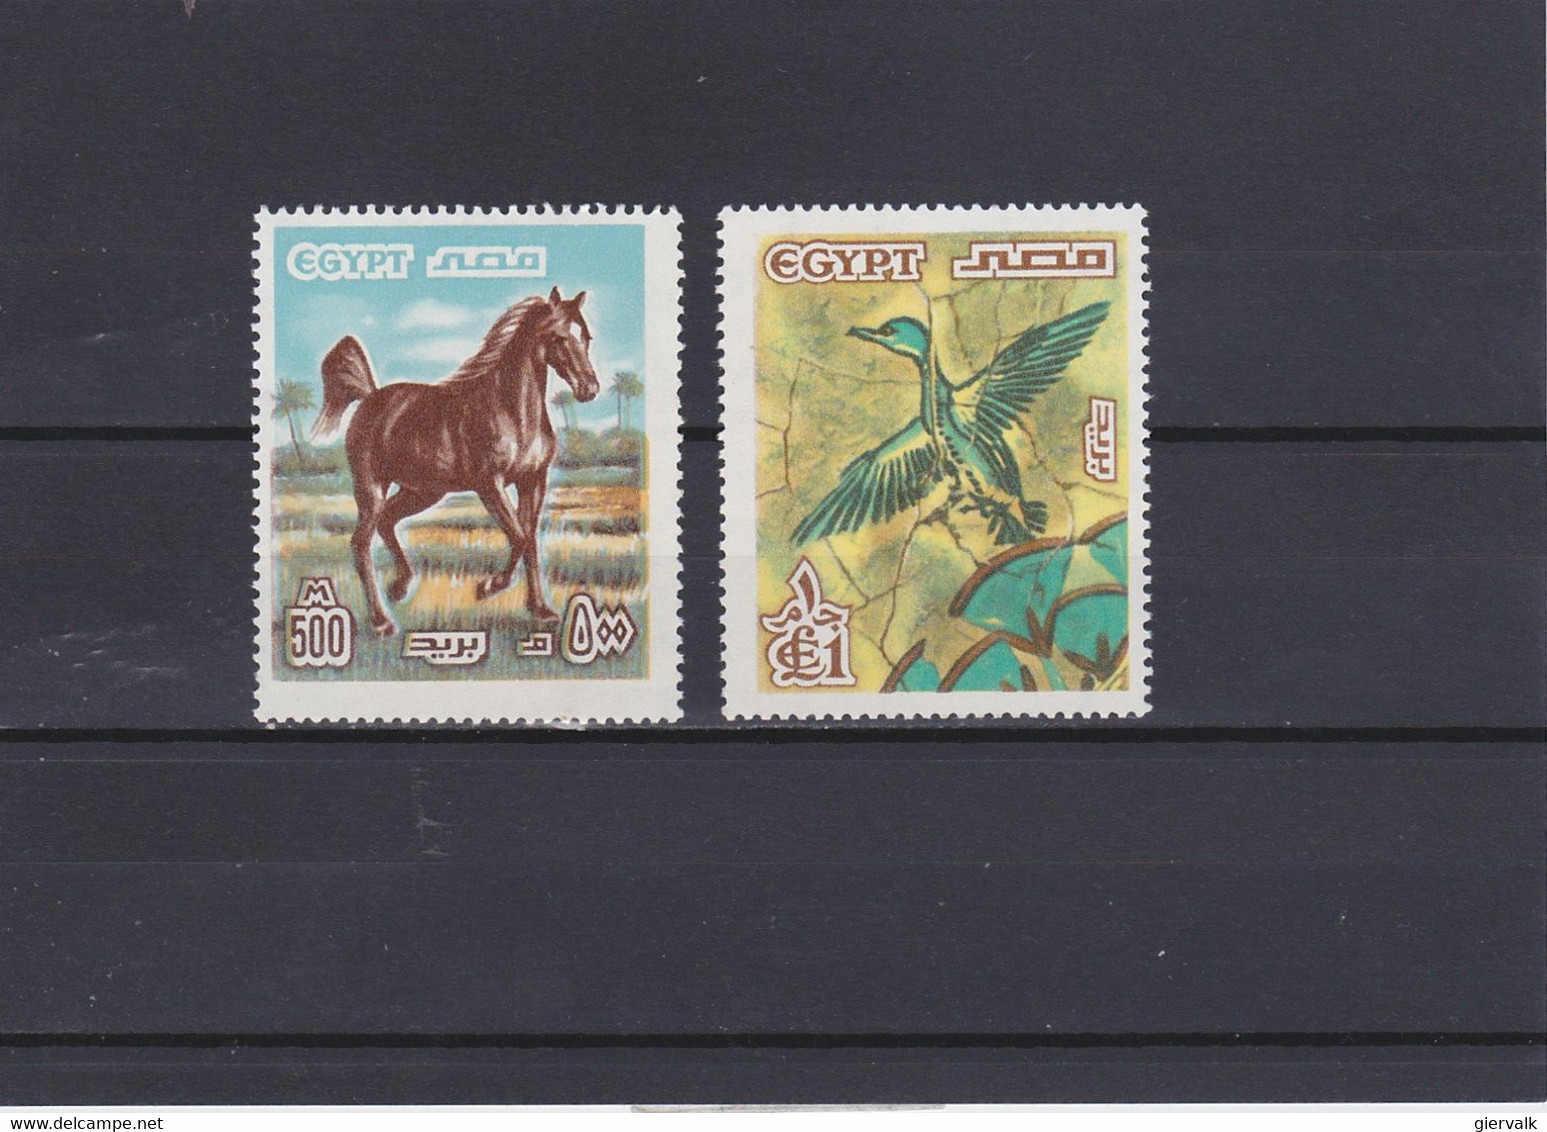 EGYPT 1978 HORSE + BIRD.(HIGHEST VALUES)MNH.. - Used Stamps